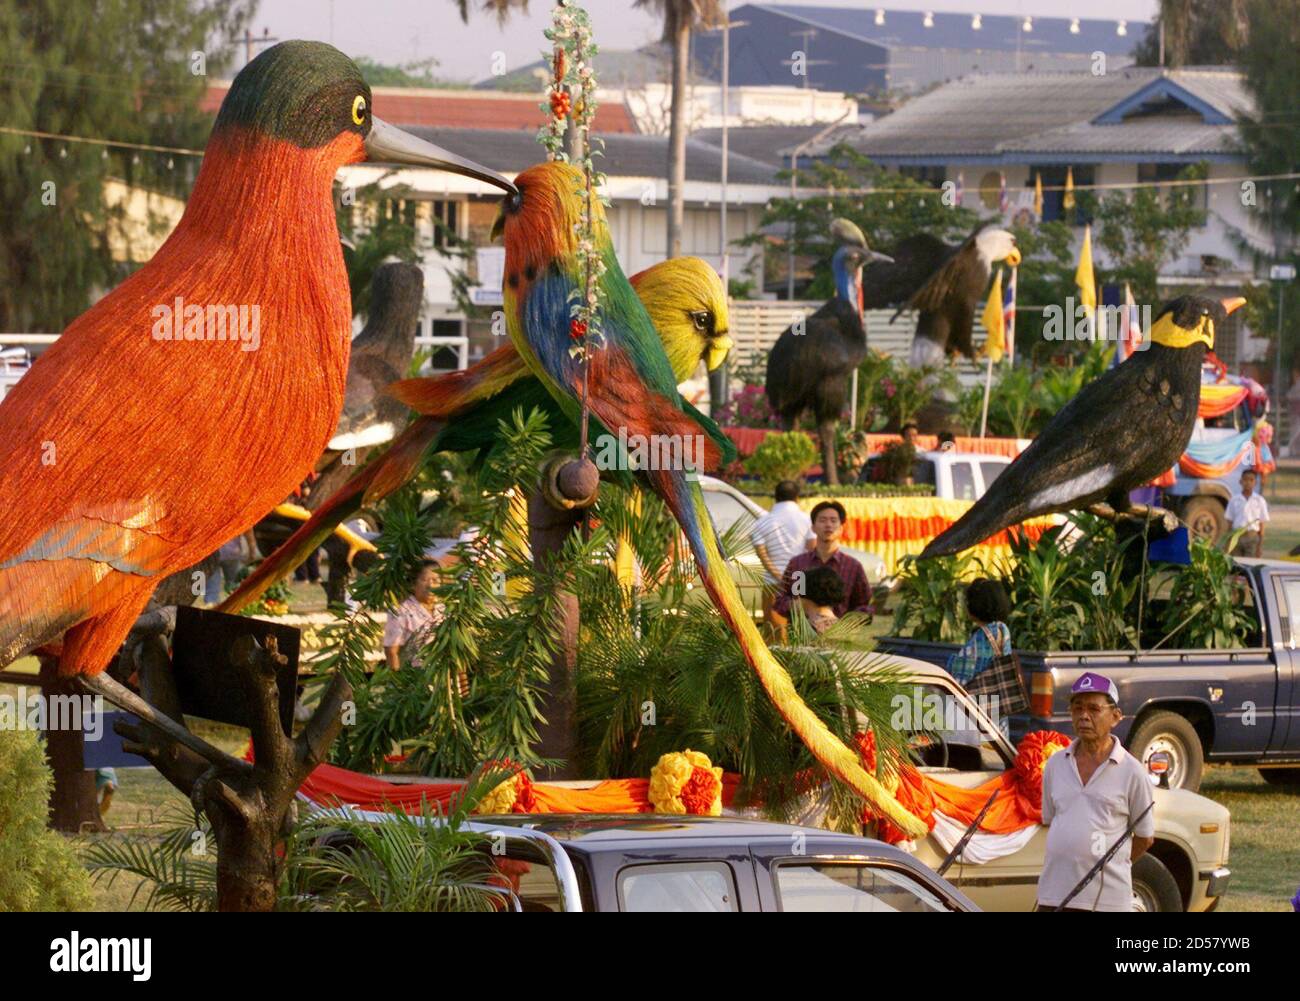 Giant birds made of straw from rice plants are displayed in Chainat, 200 kms north of Bangkok February 12. The annual 'straw bird' festival which highlights Thai birds, some of which are endangered, began as a local tourism promotion contest fourteen years ago and has become a hobby for farmers and bird lovers.   ??» Stock Photo